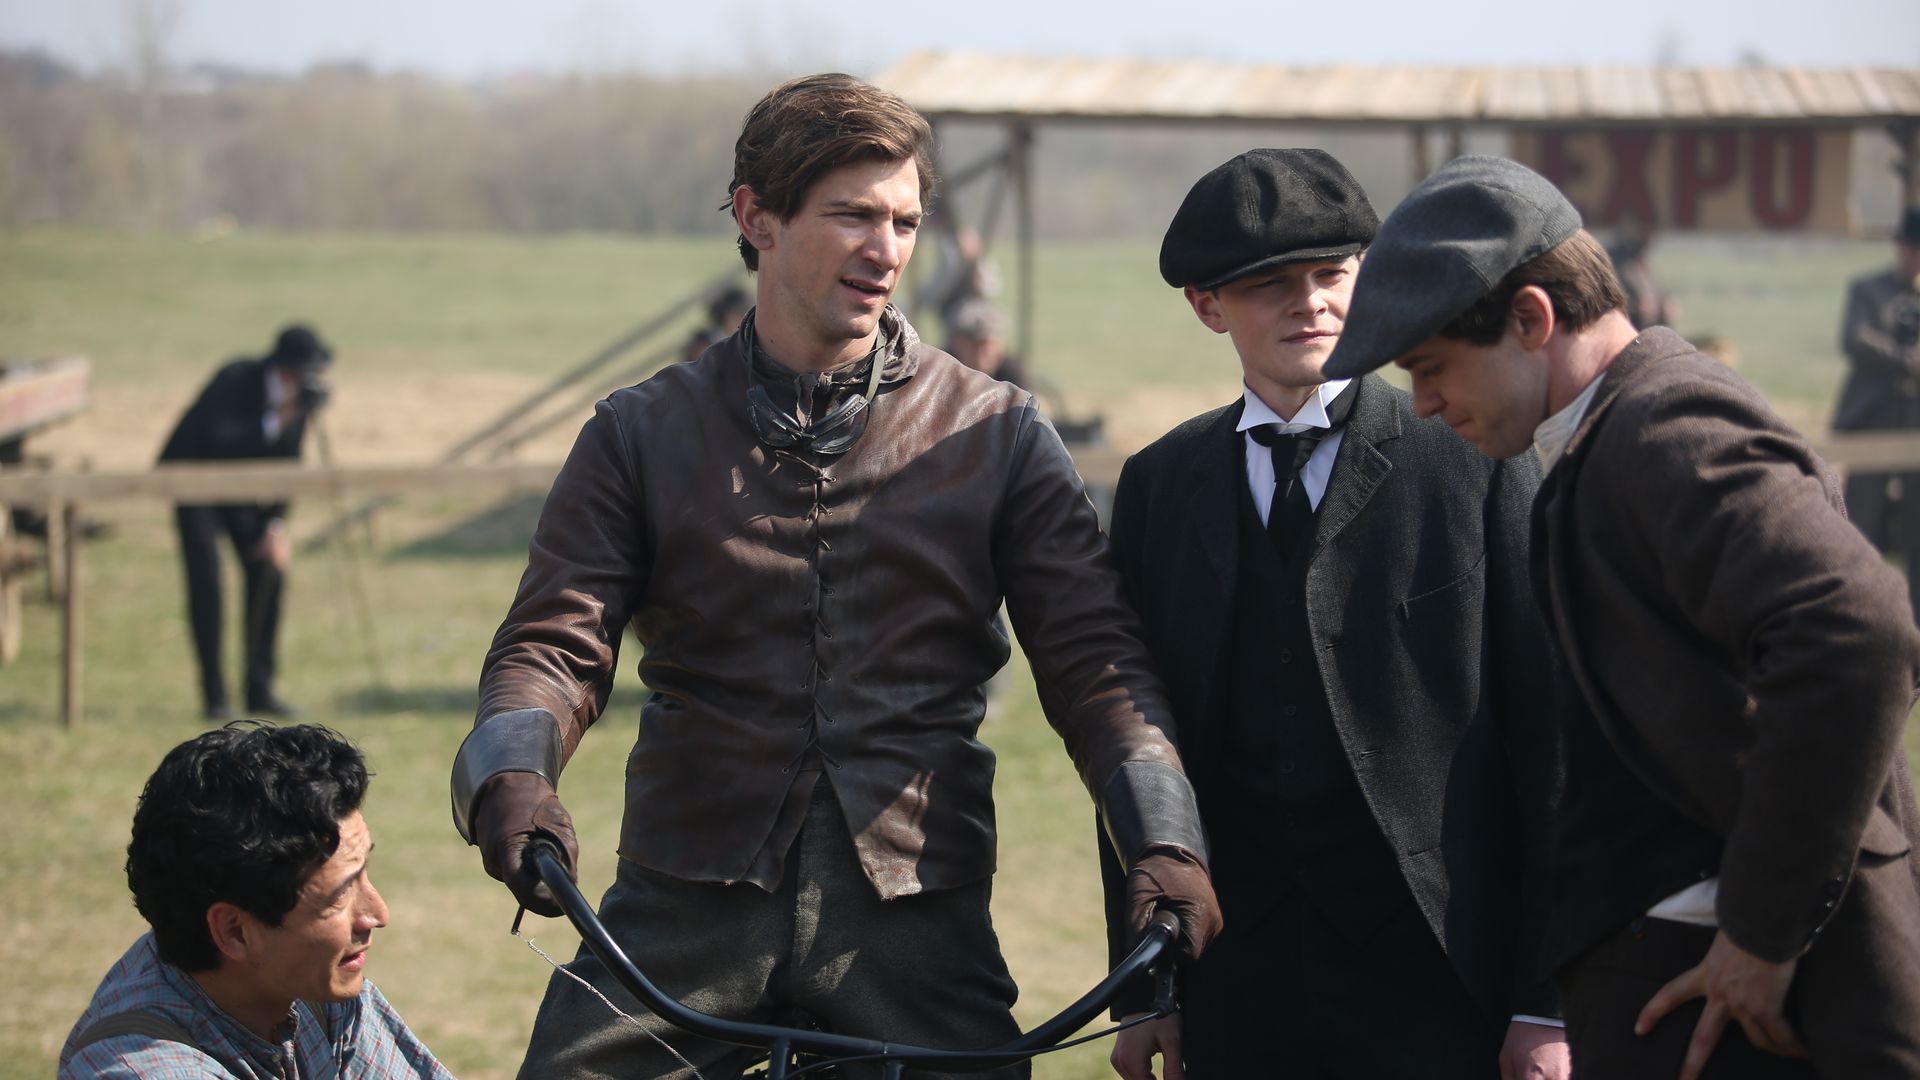 Harley and the Davidsons background